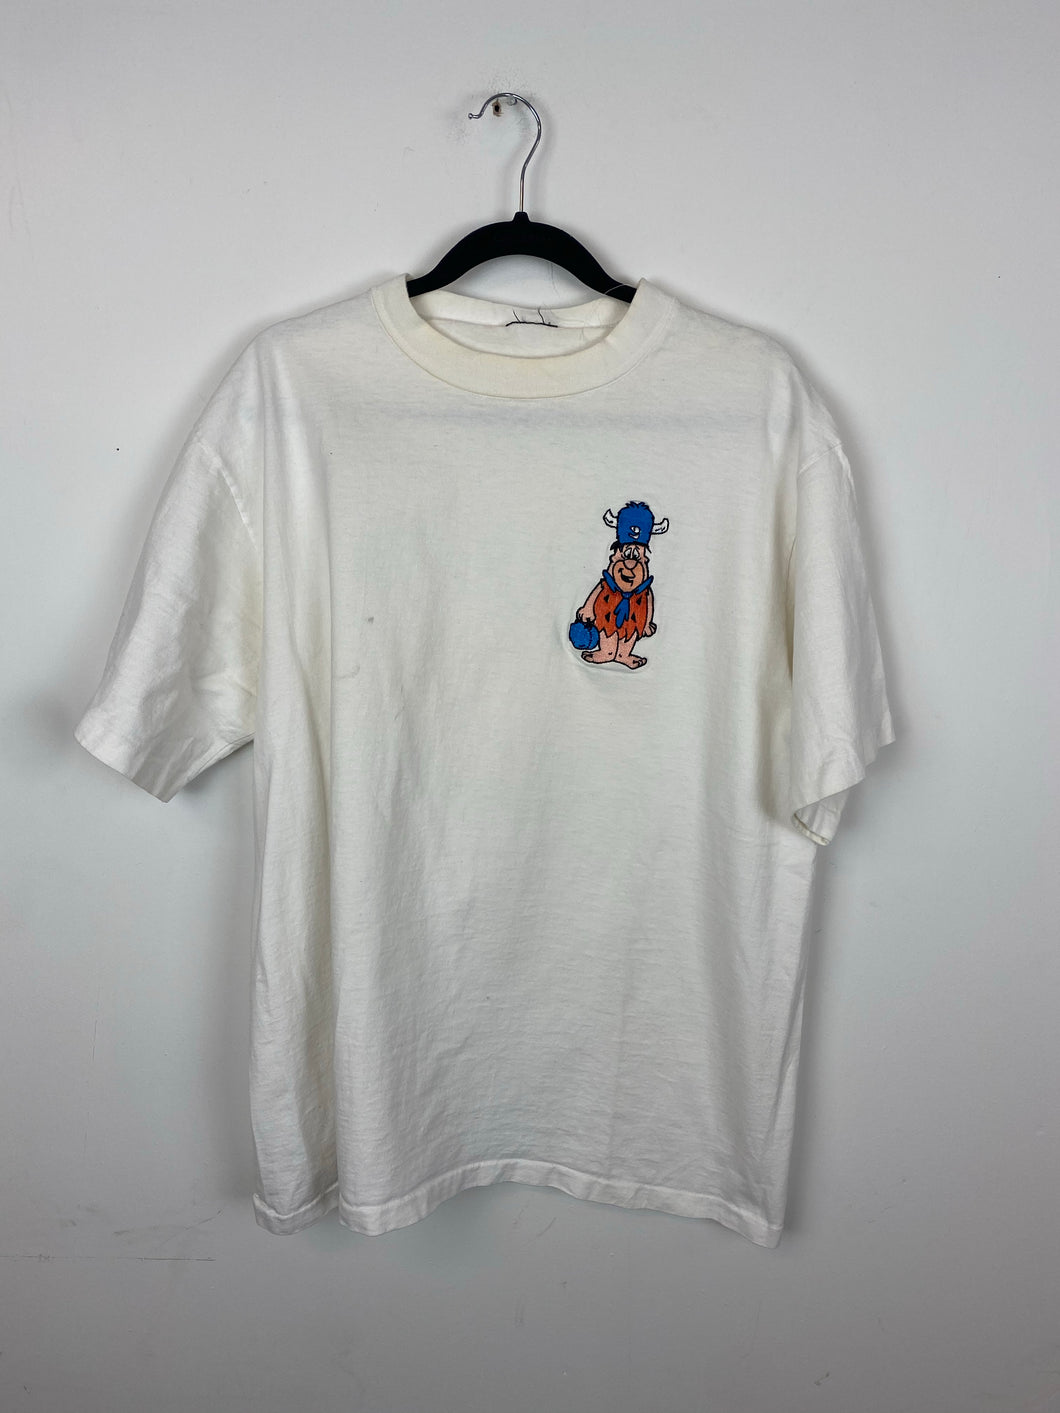 Vintage heavy weight embroidered Fred t shirt - L